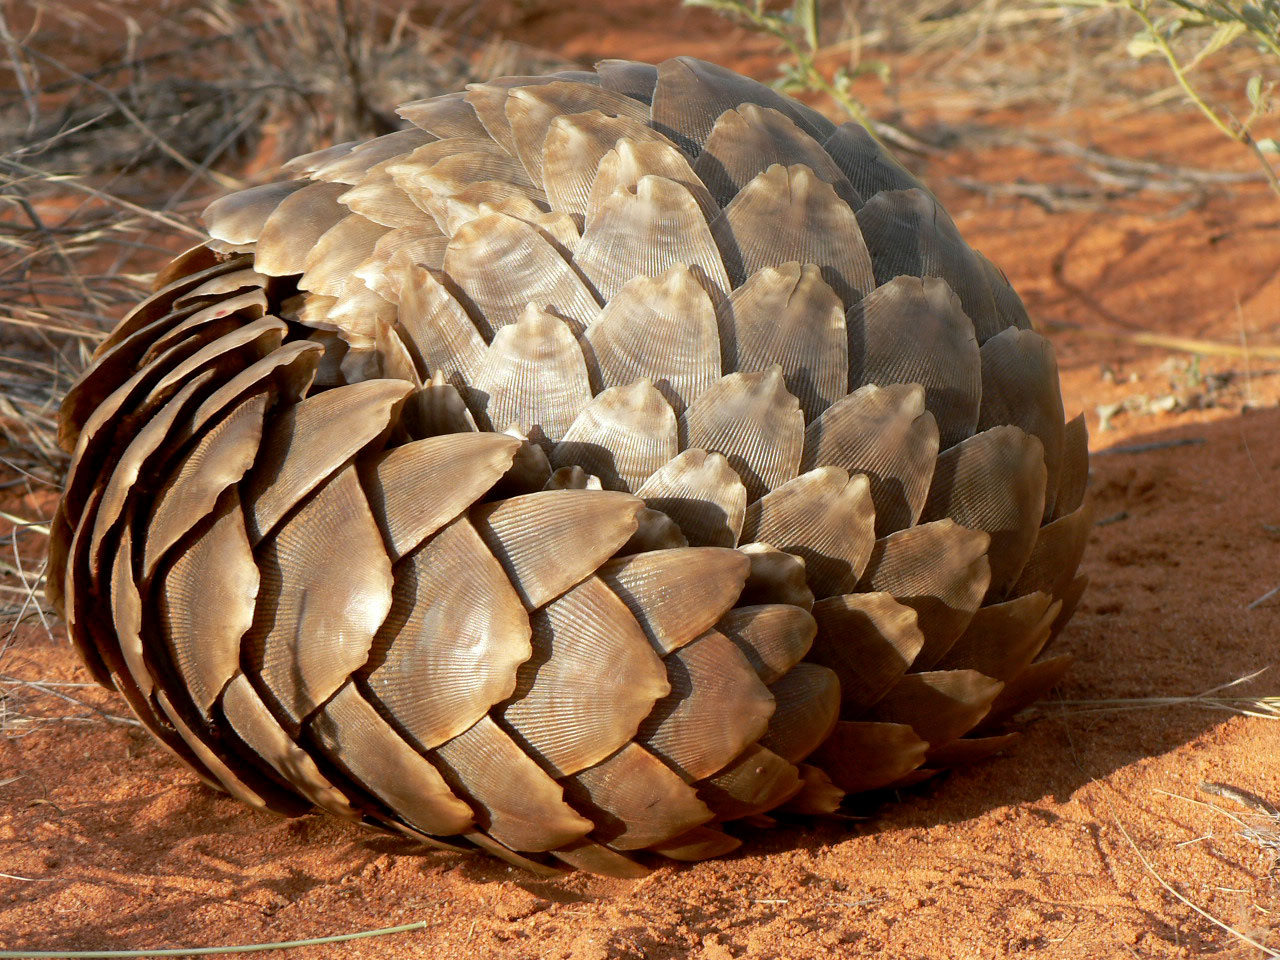 pangolin-curled-up-APWG